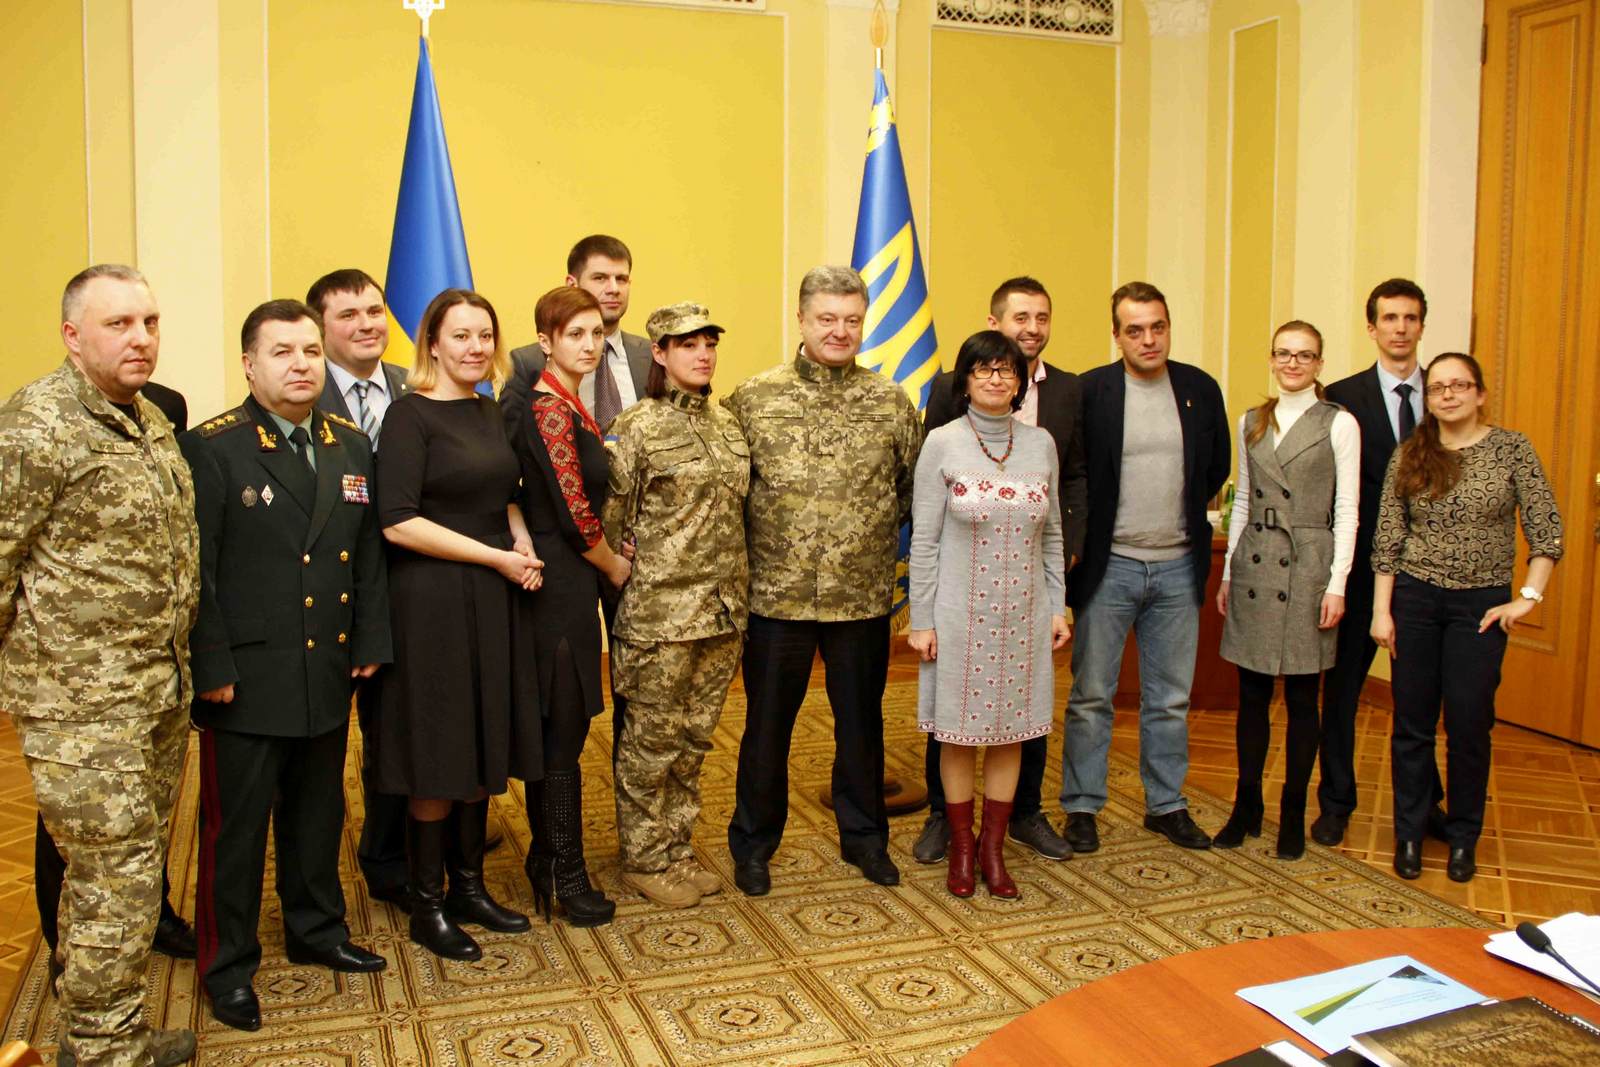 President Poroshenko at a meeting with volunteers from the "Volunteer Force" on 14 March 2015. Photo: mil.gov.ua